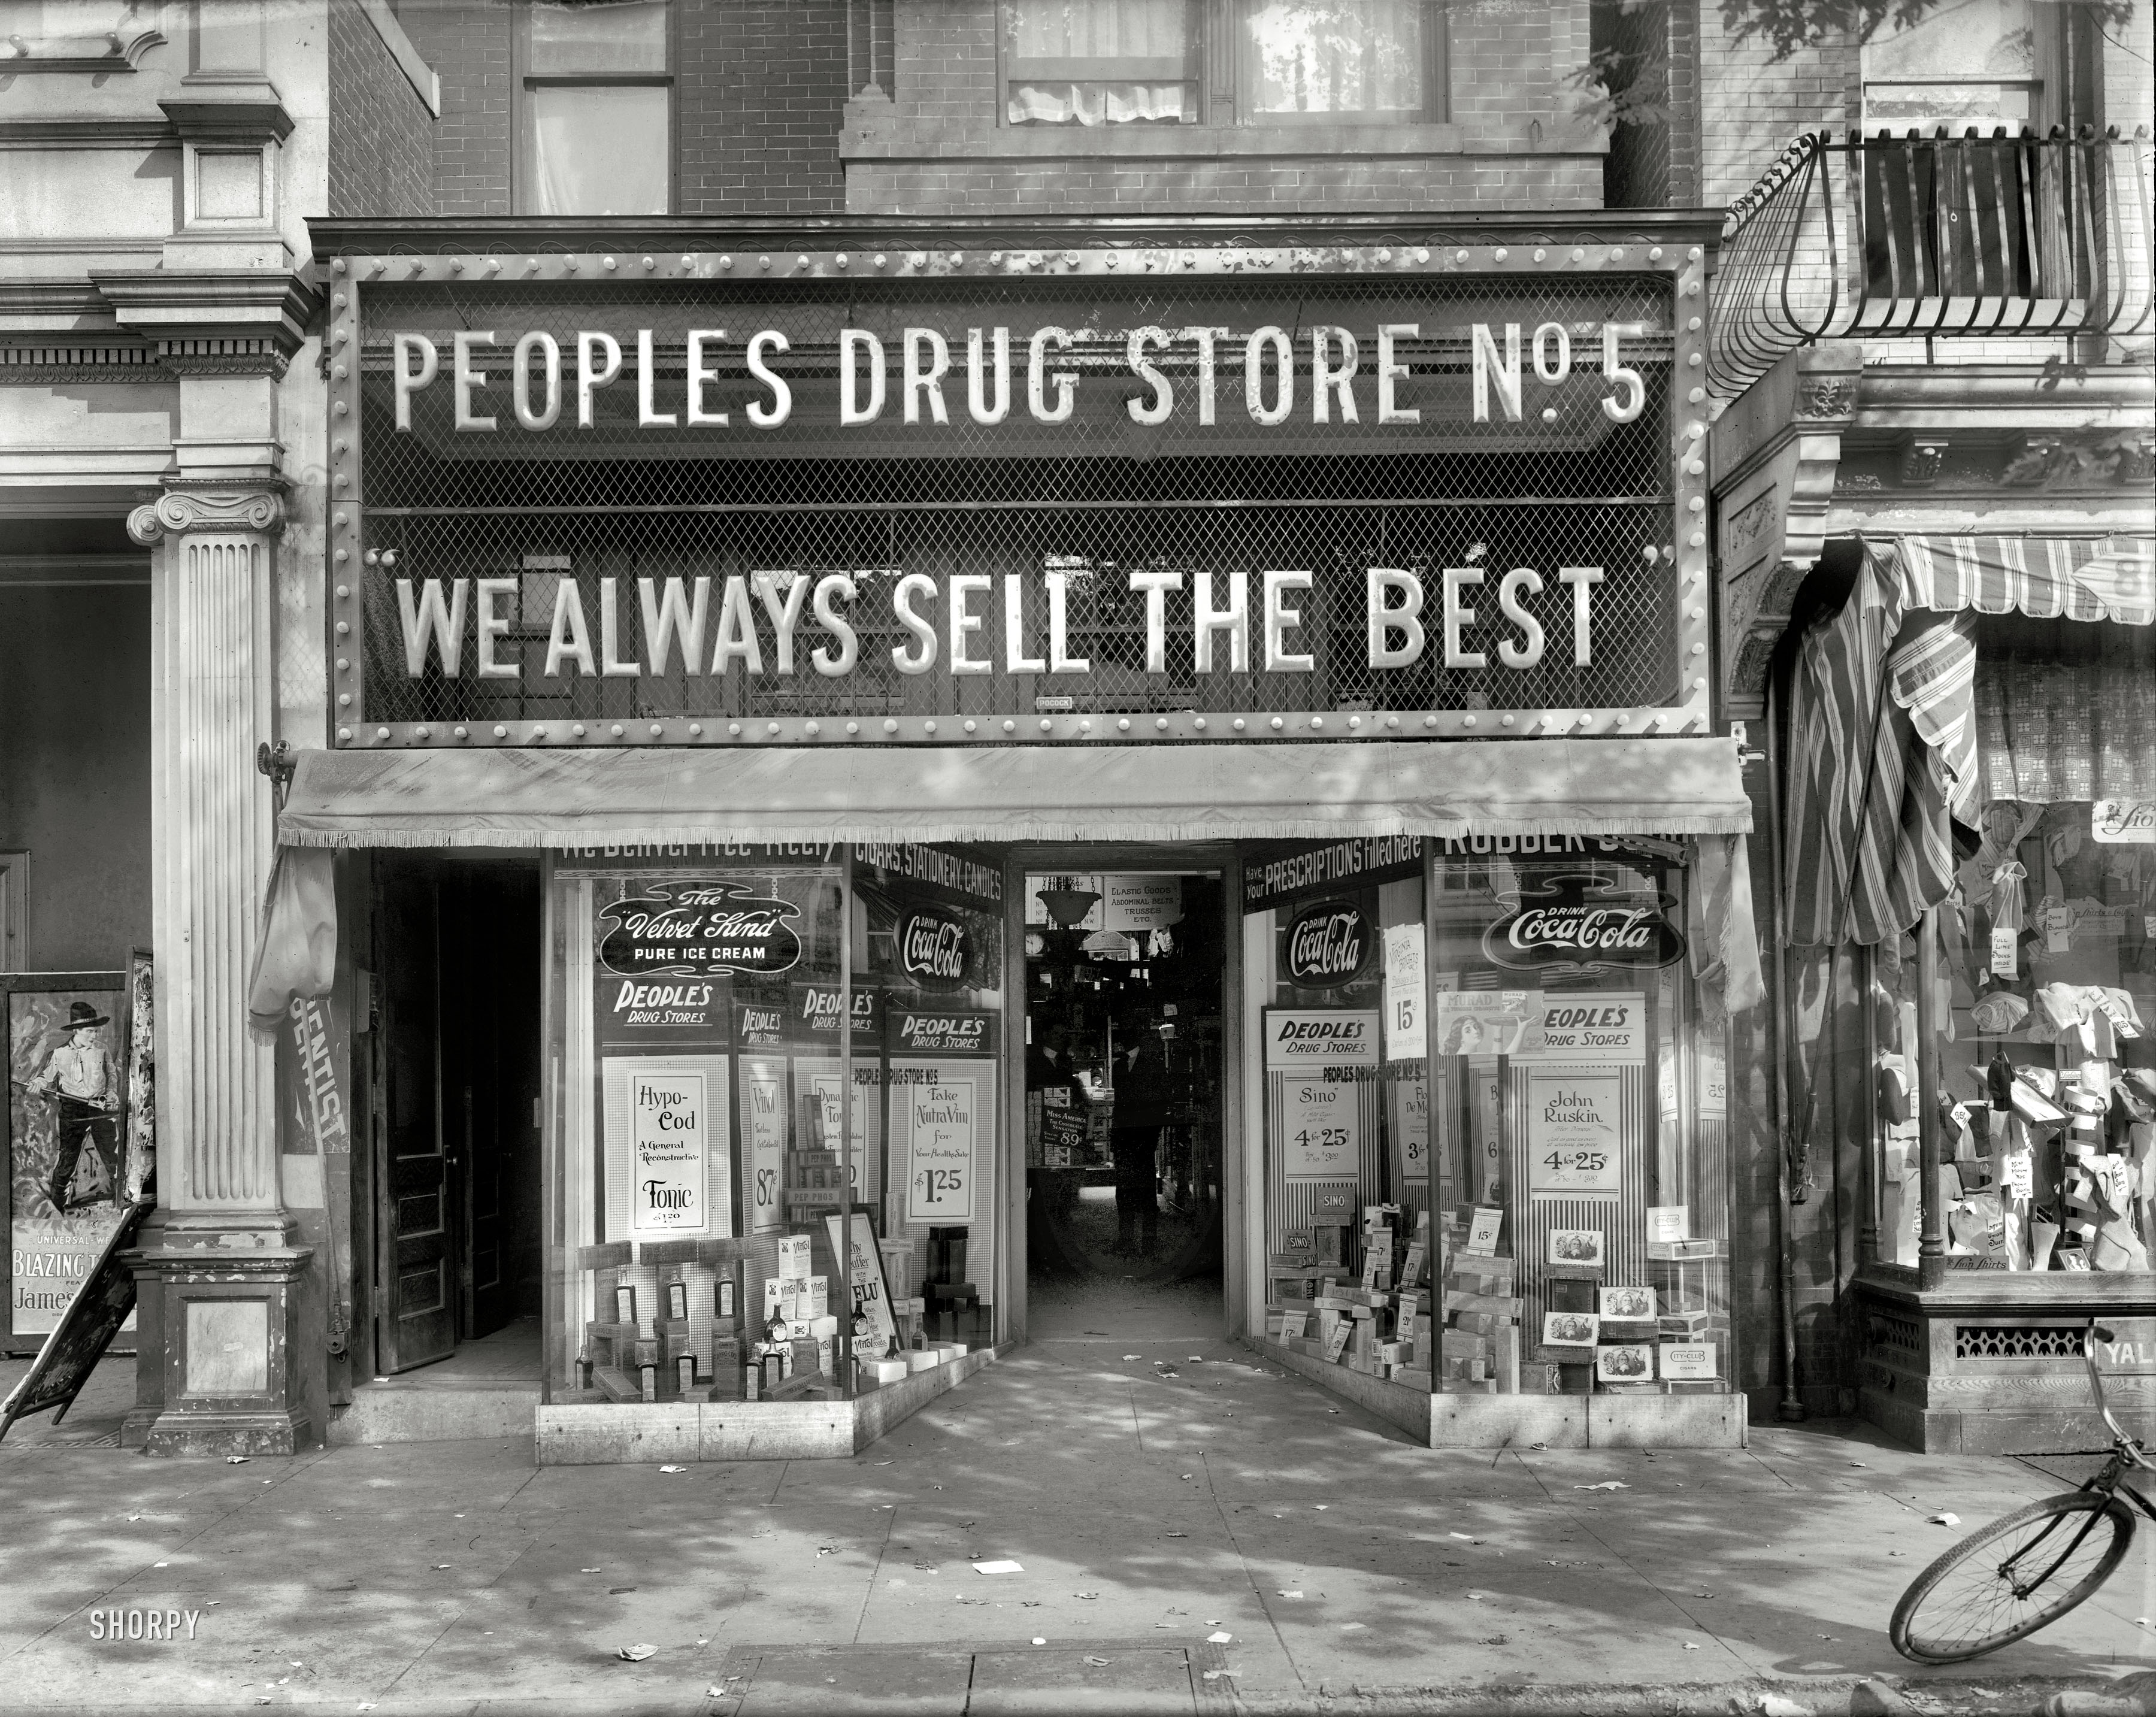 Washington, D.C., circa 1920. "People's Drug Store No. 5, Eighth and H Street N.E." If you're not lured in by the abdominal trusses, cigars or Hypo-Cod, there's always the photoplay next door -- "Blazing the (Something)." View full size.